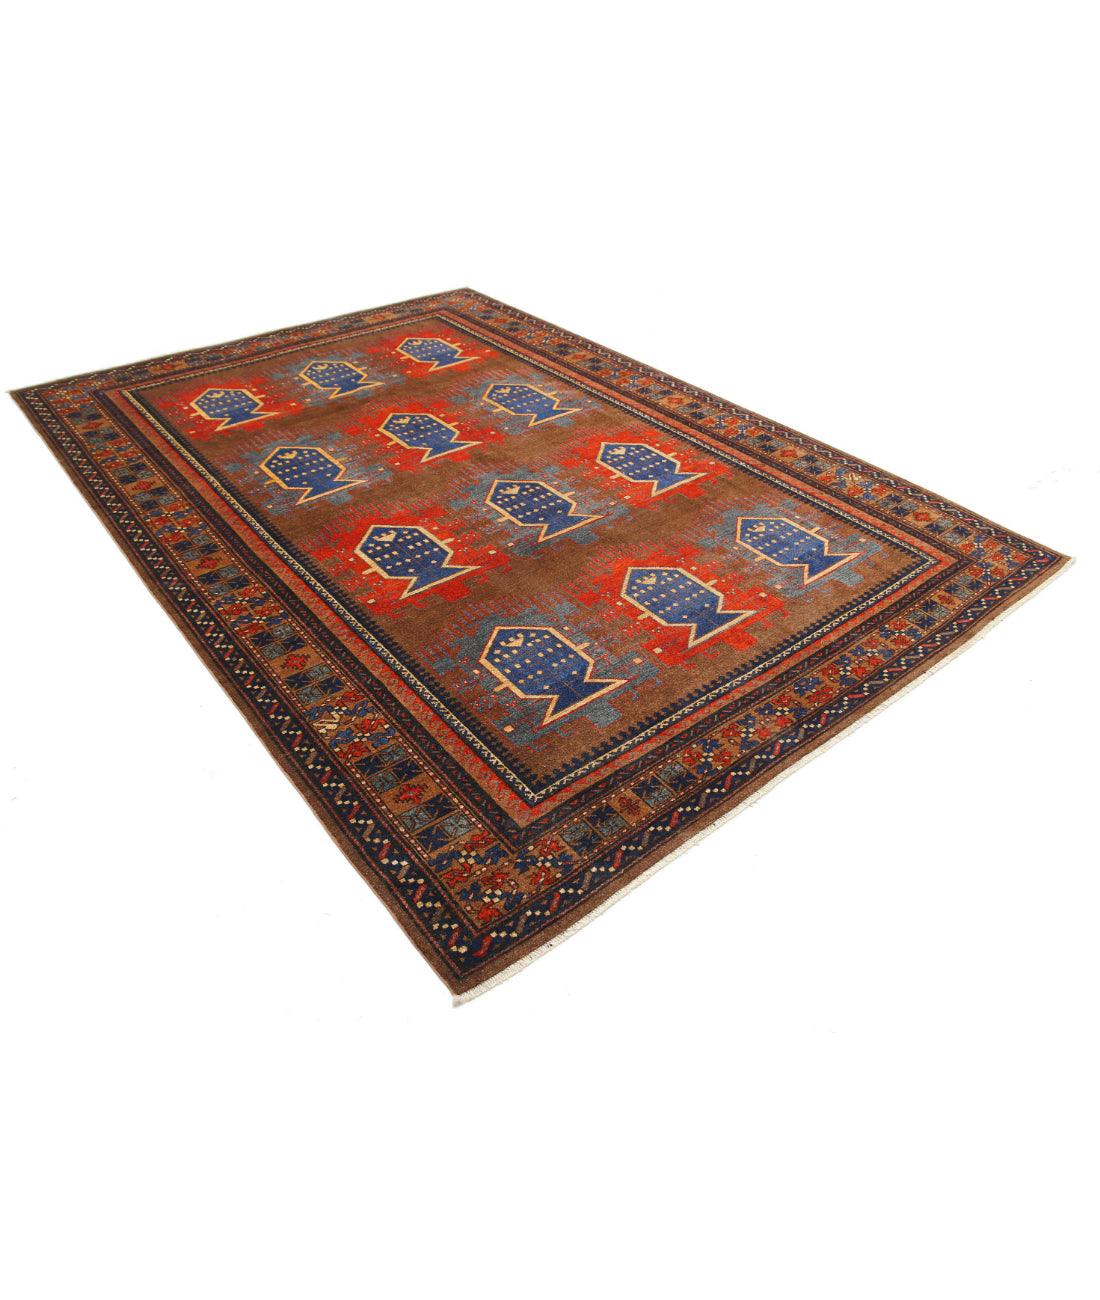 Hand Knotted Nomadic Caucasian Humna Wool Rug - 7'3'' x 10'3'' 7'3'' x 10'3'' (218 X 308) / Brown / Brown